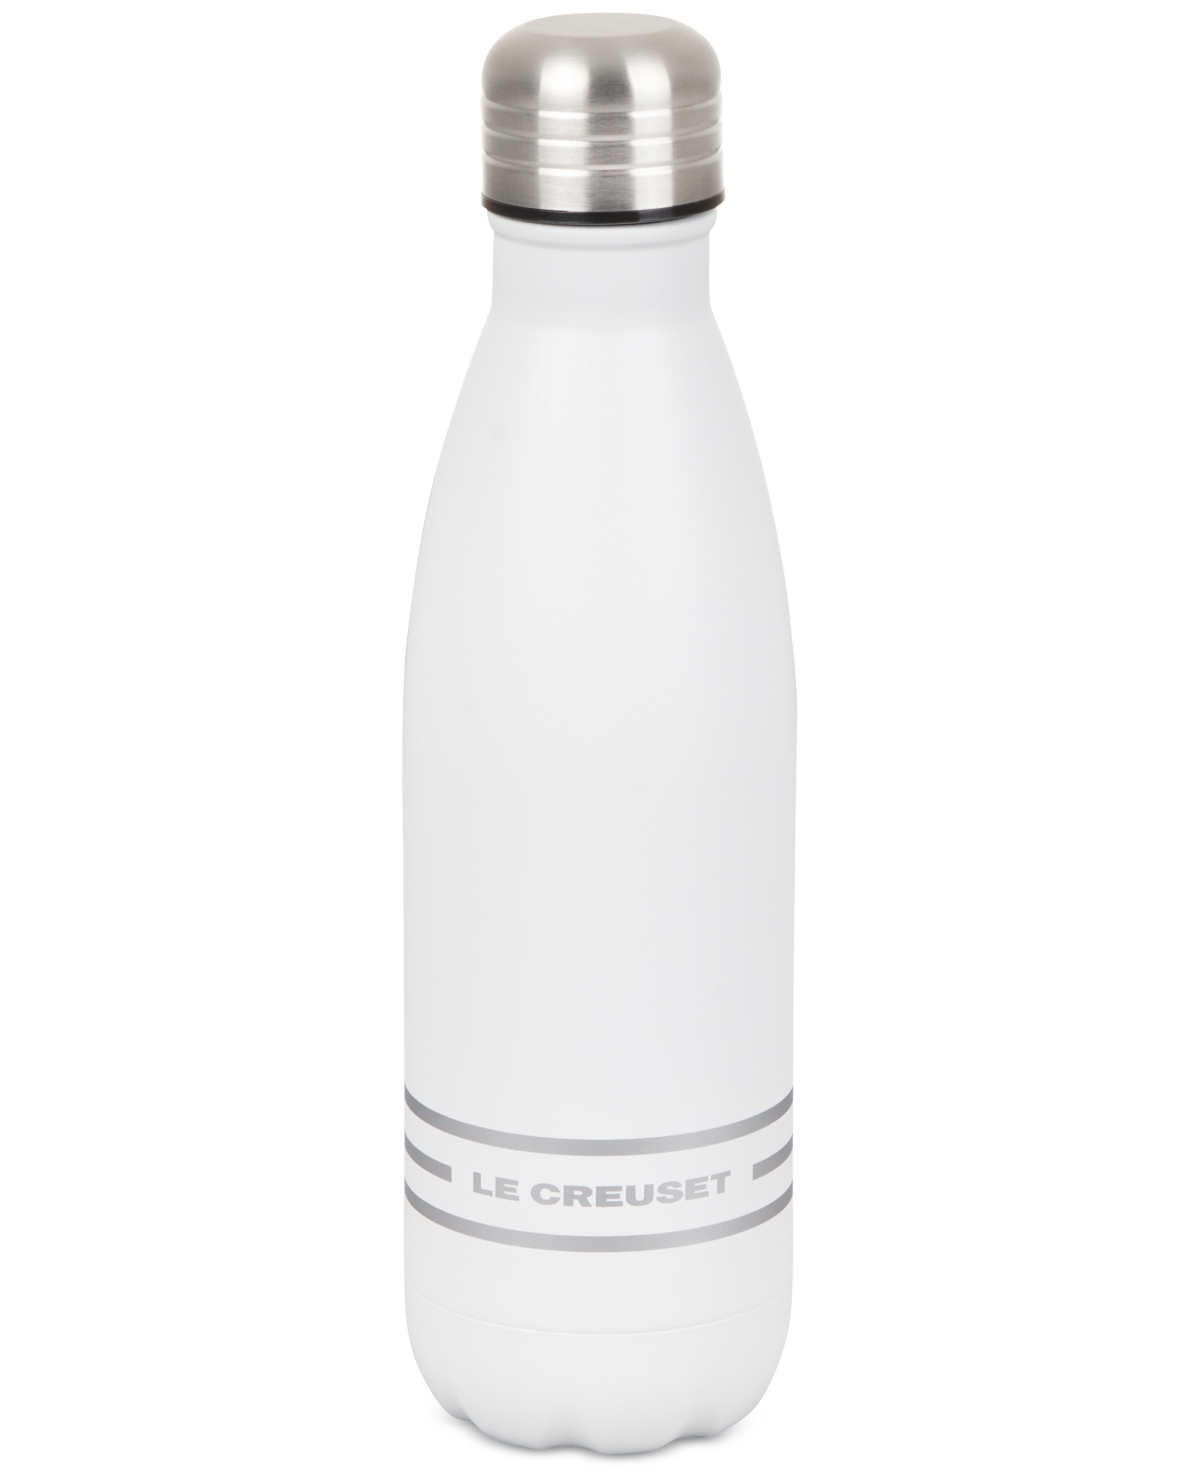 Le Creuset Stainless Steel Hydration Bottle, 17 Oz. In Matte White